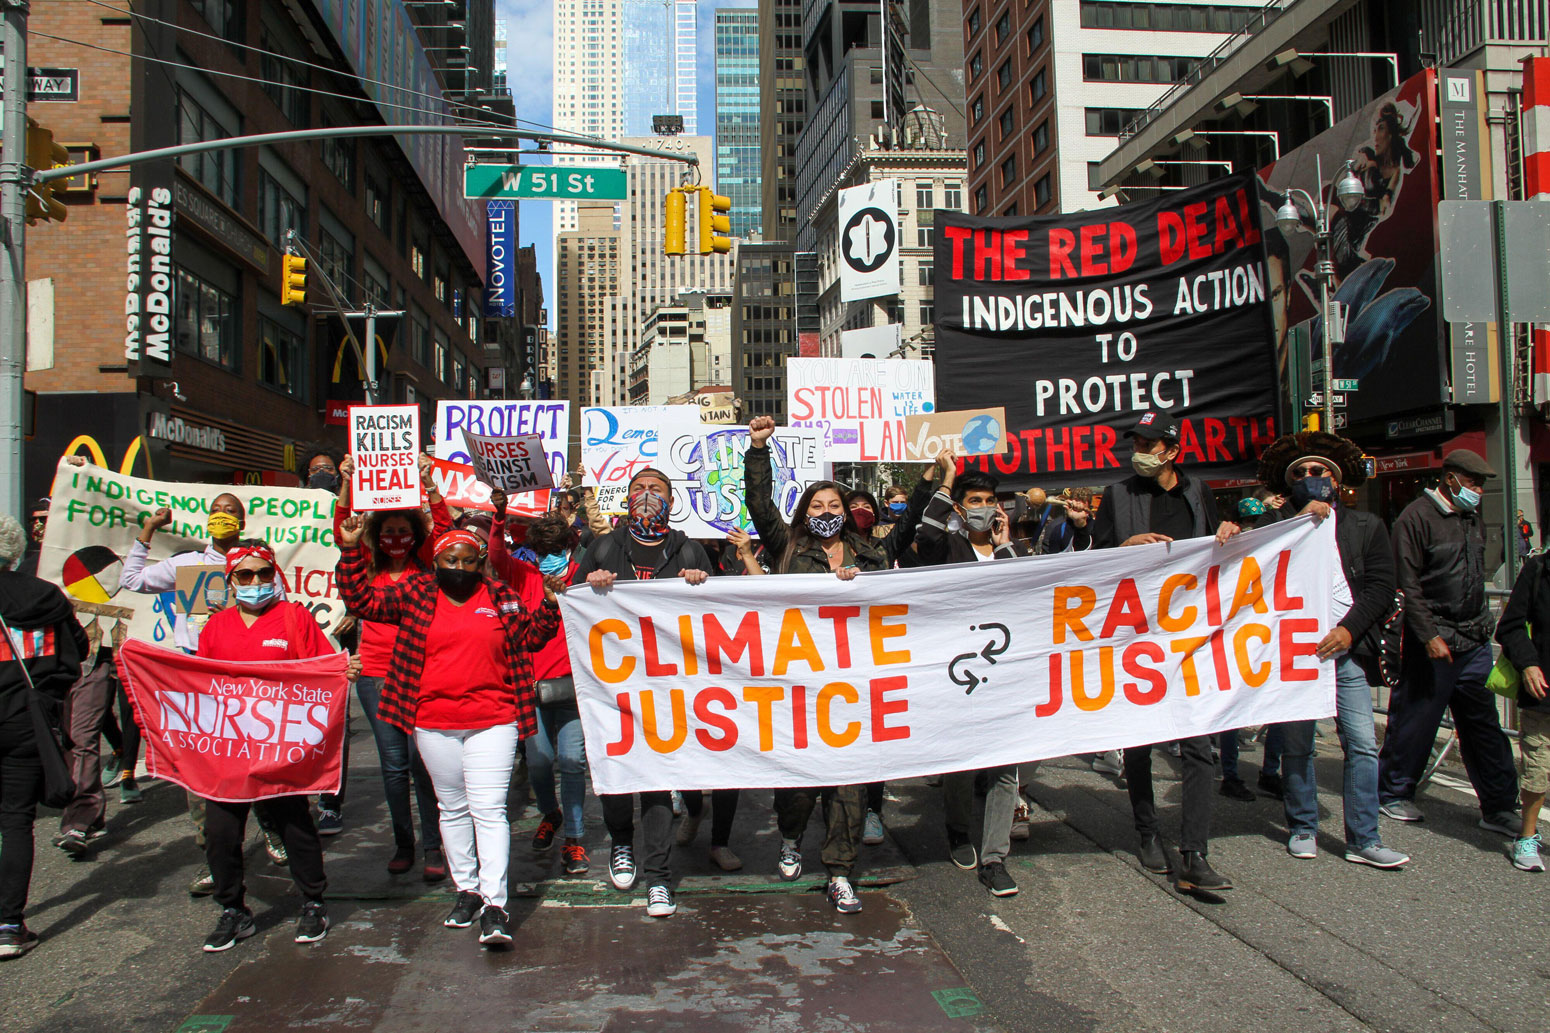 Black Lives Matter and climate activists in New York demanding climate justice